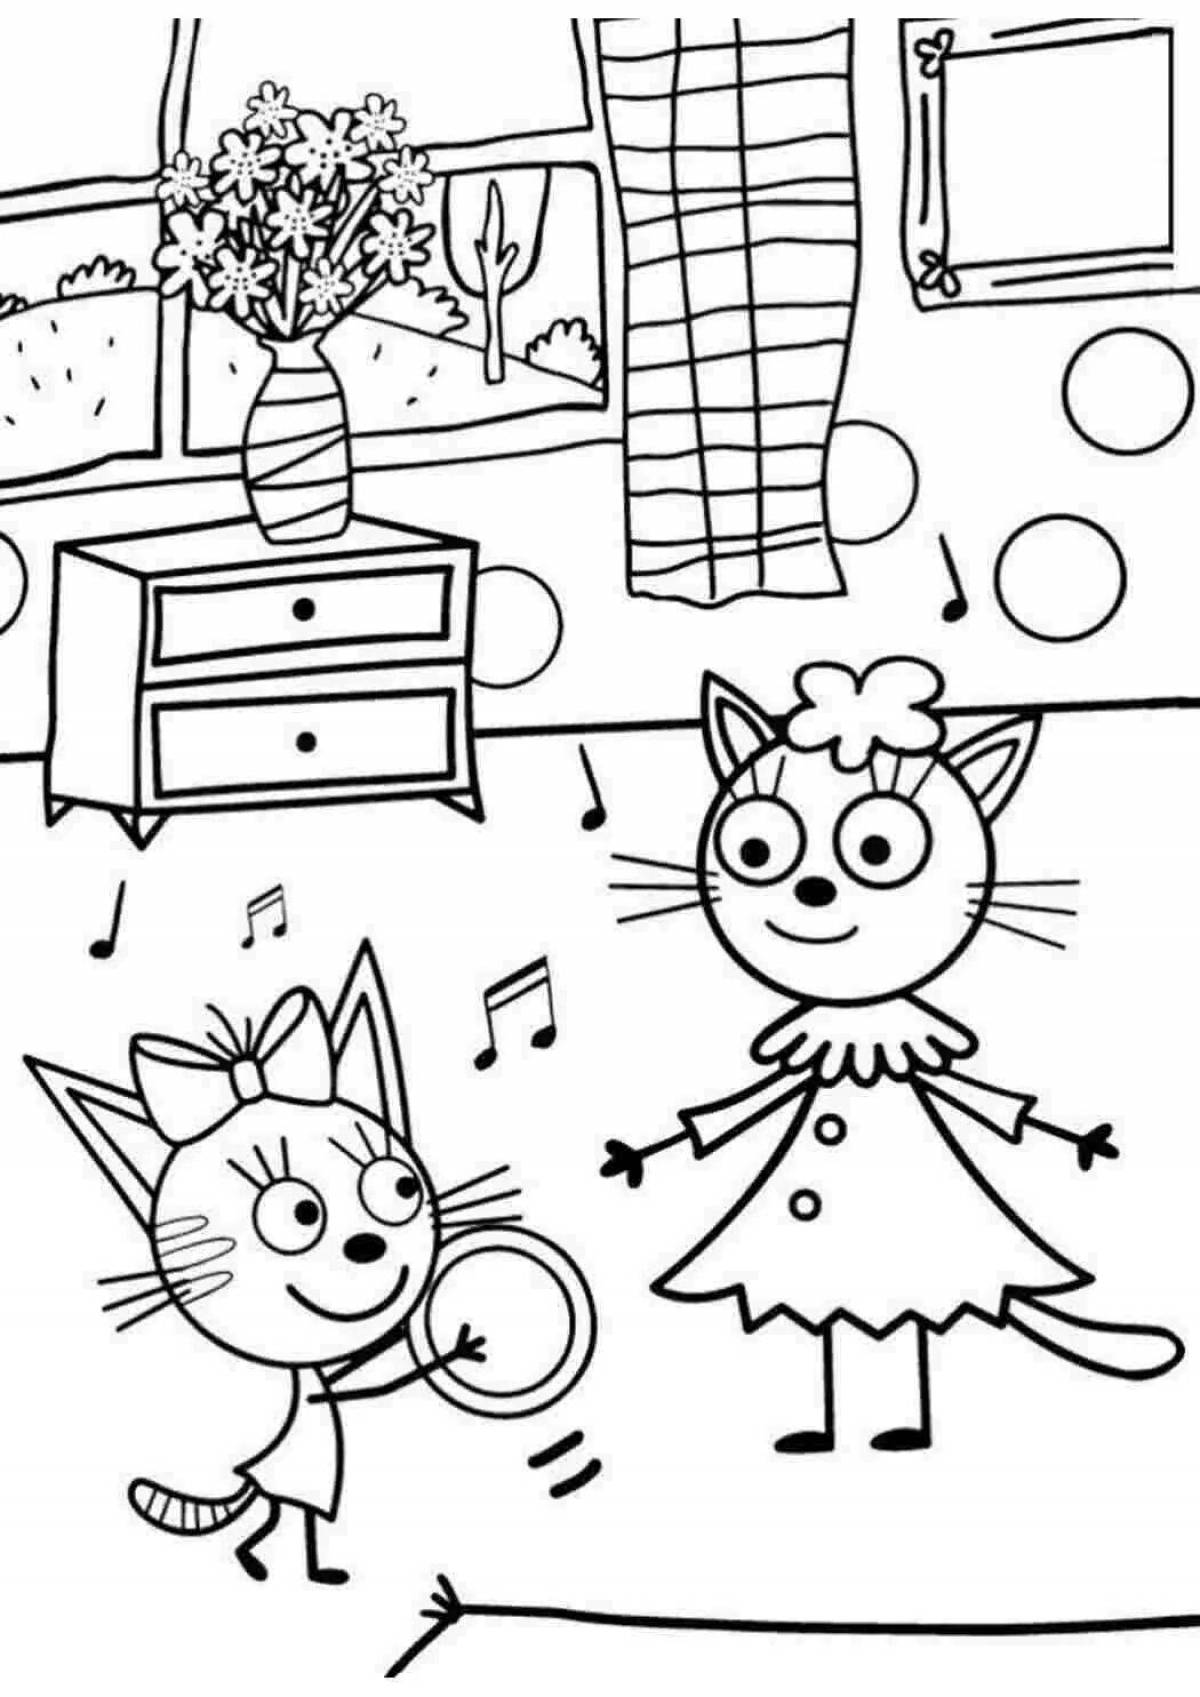 Fancy coloring 3 cats for girls